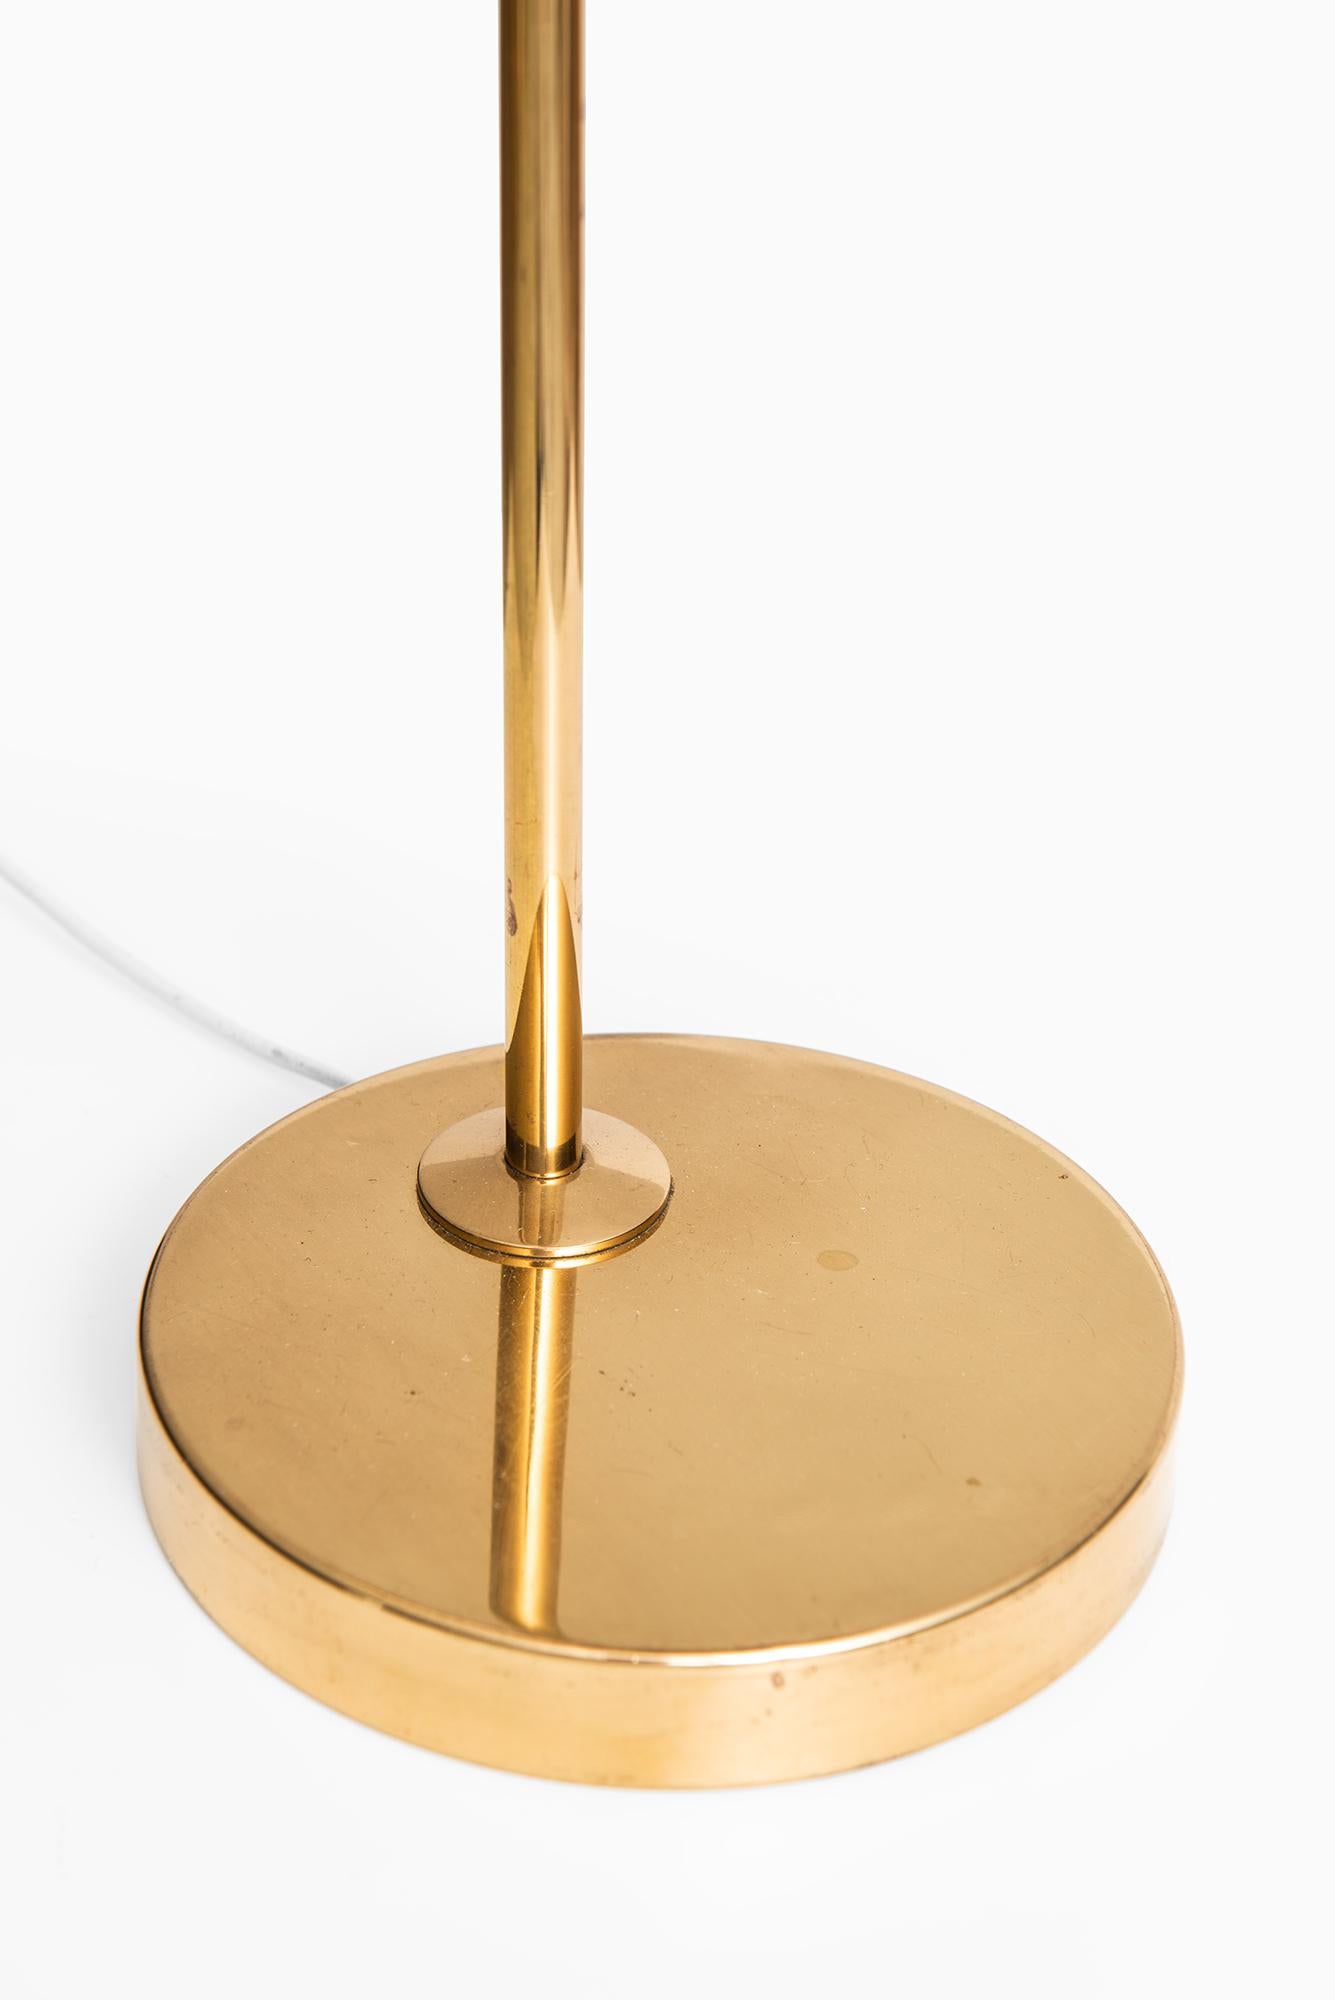 Table Lamp Model B-075 in Brass Produced by Bergbom in Sweden In Good Condition For Sale In Limhamn, Skåne län